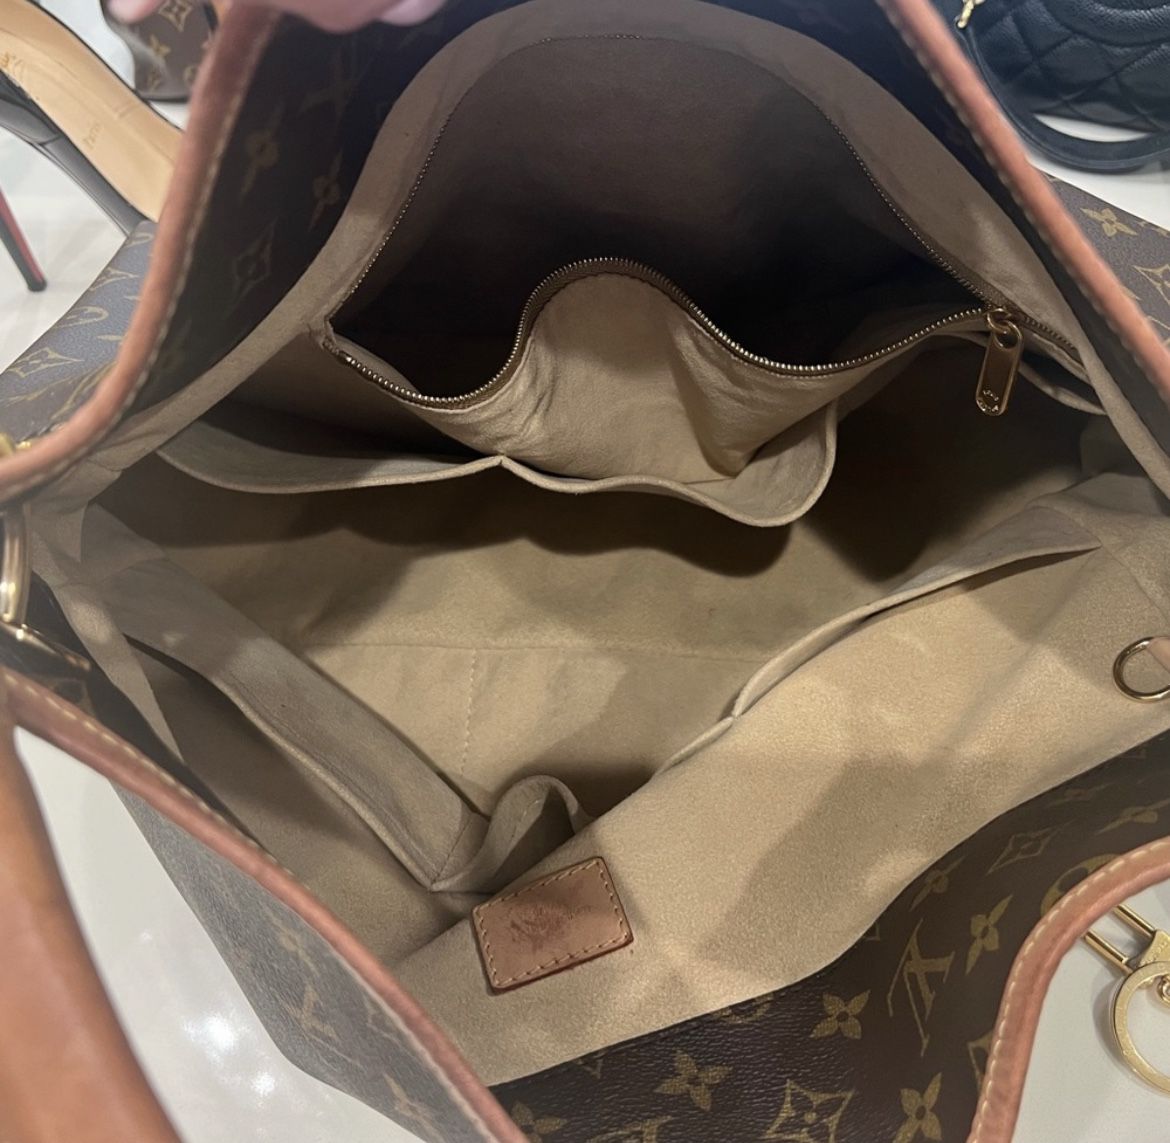 Louis Vuitton artistry bag for Sale in Gulfport, FL - OfferUp